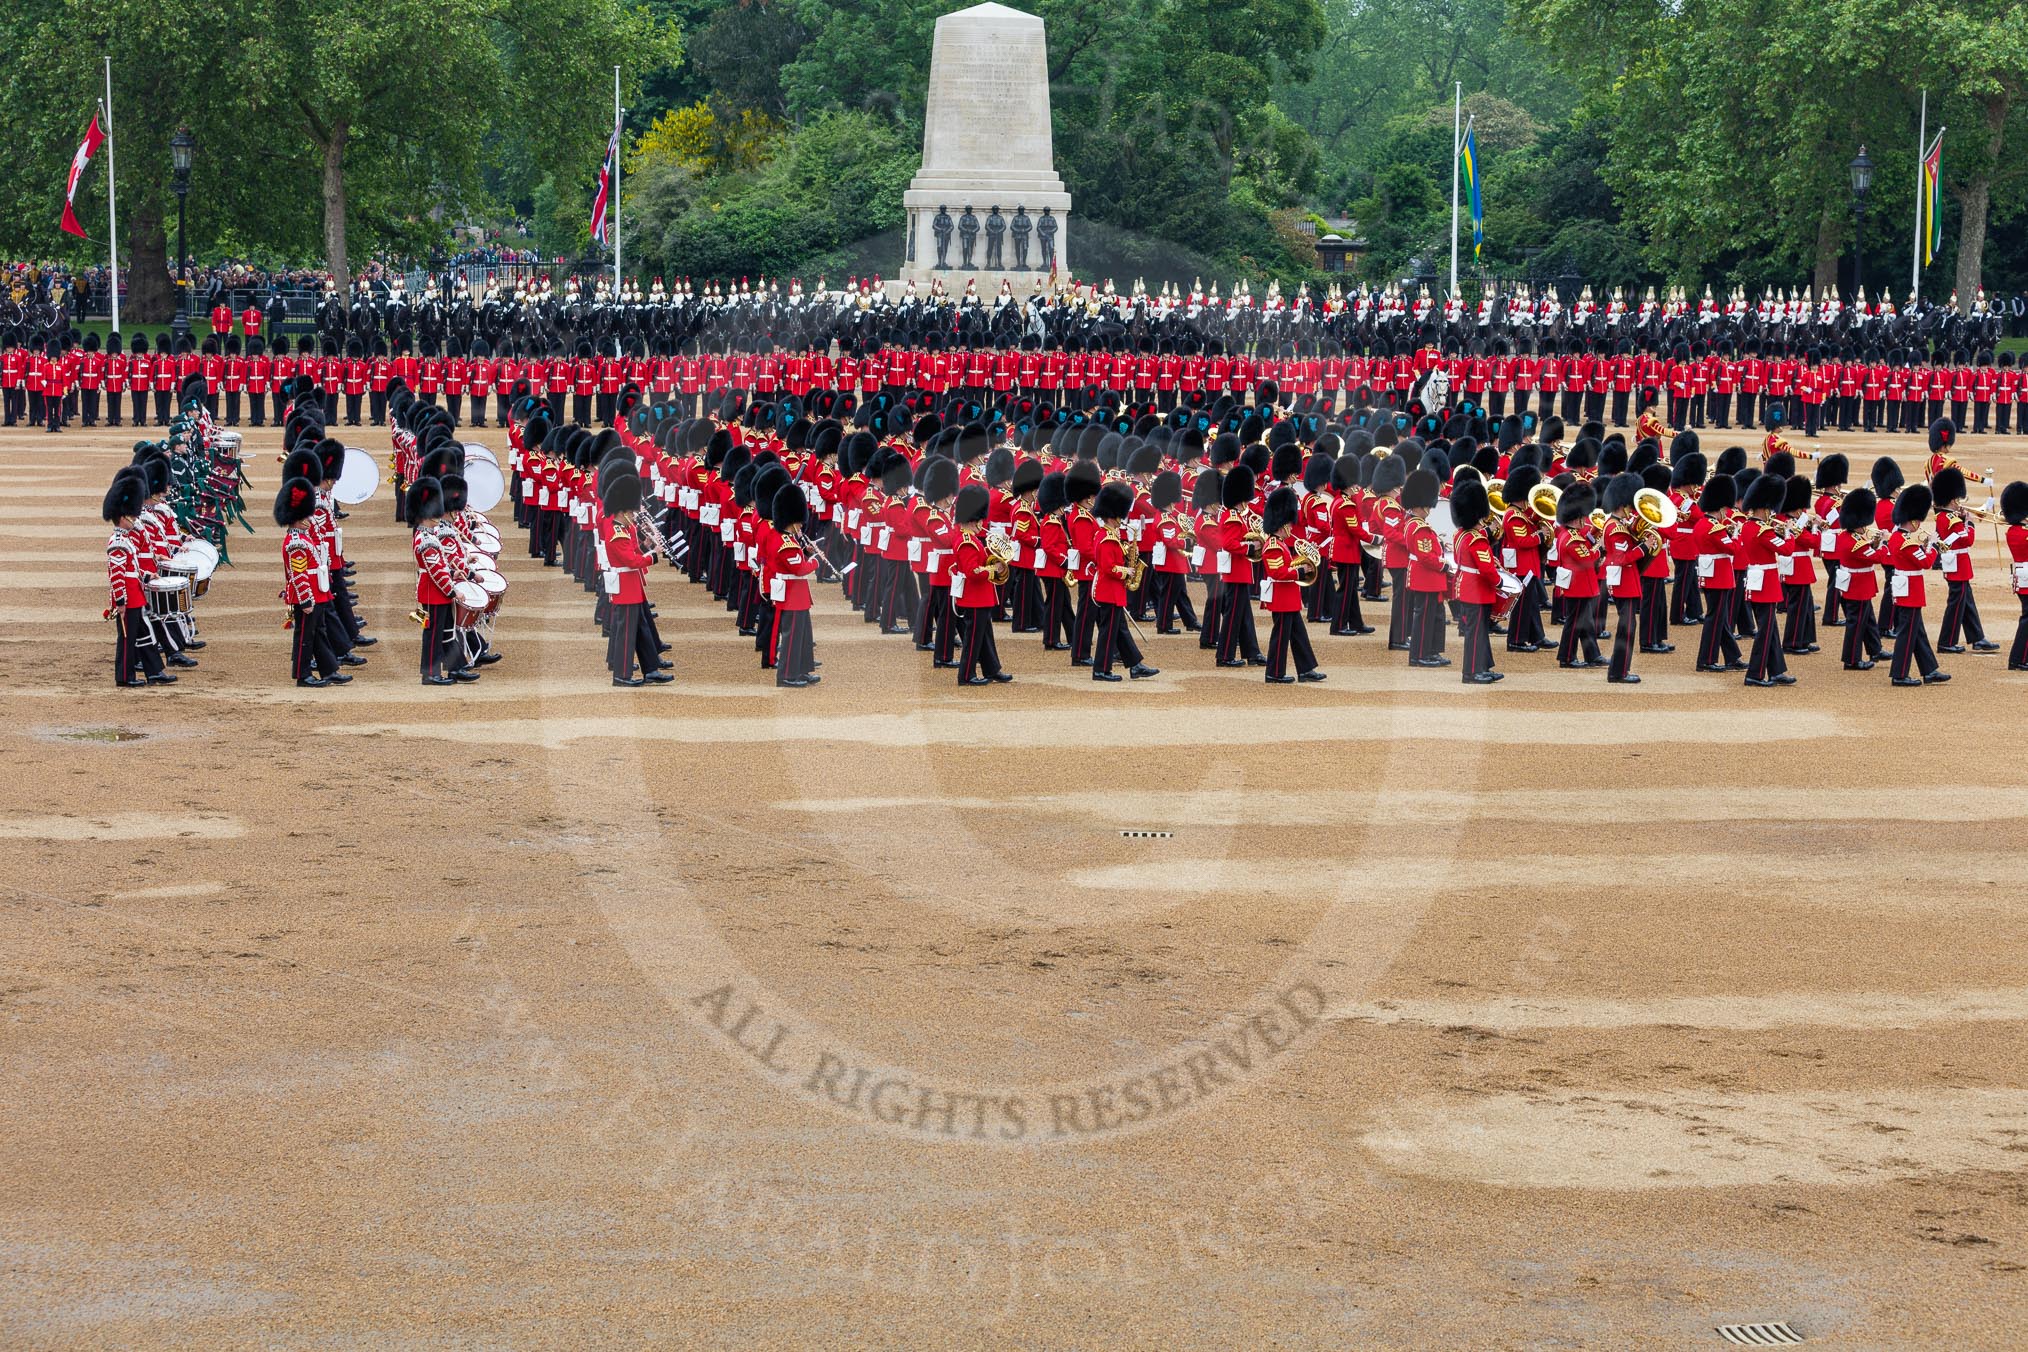 The Colonel's Review 2016.
Horse Guards Parade, Westminster,
London,

United Kingdom,
on 04 June 2016 at 11:09, image #224